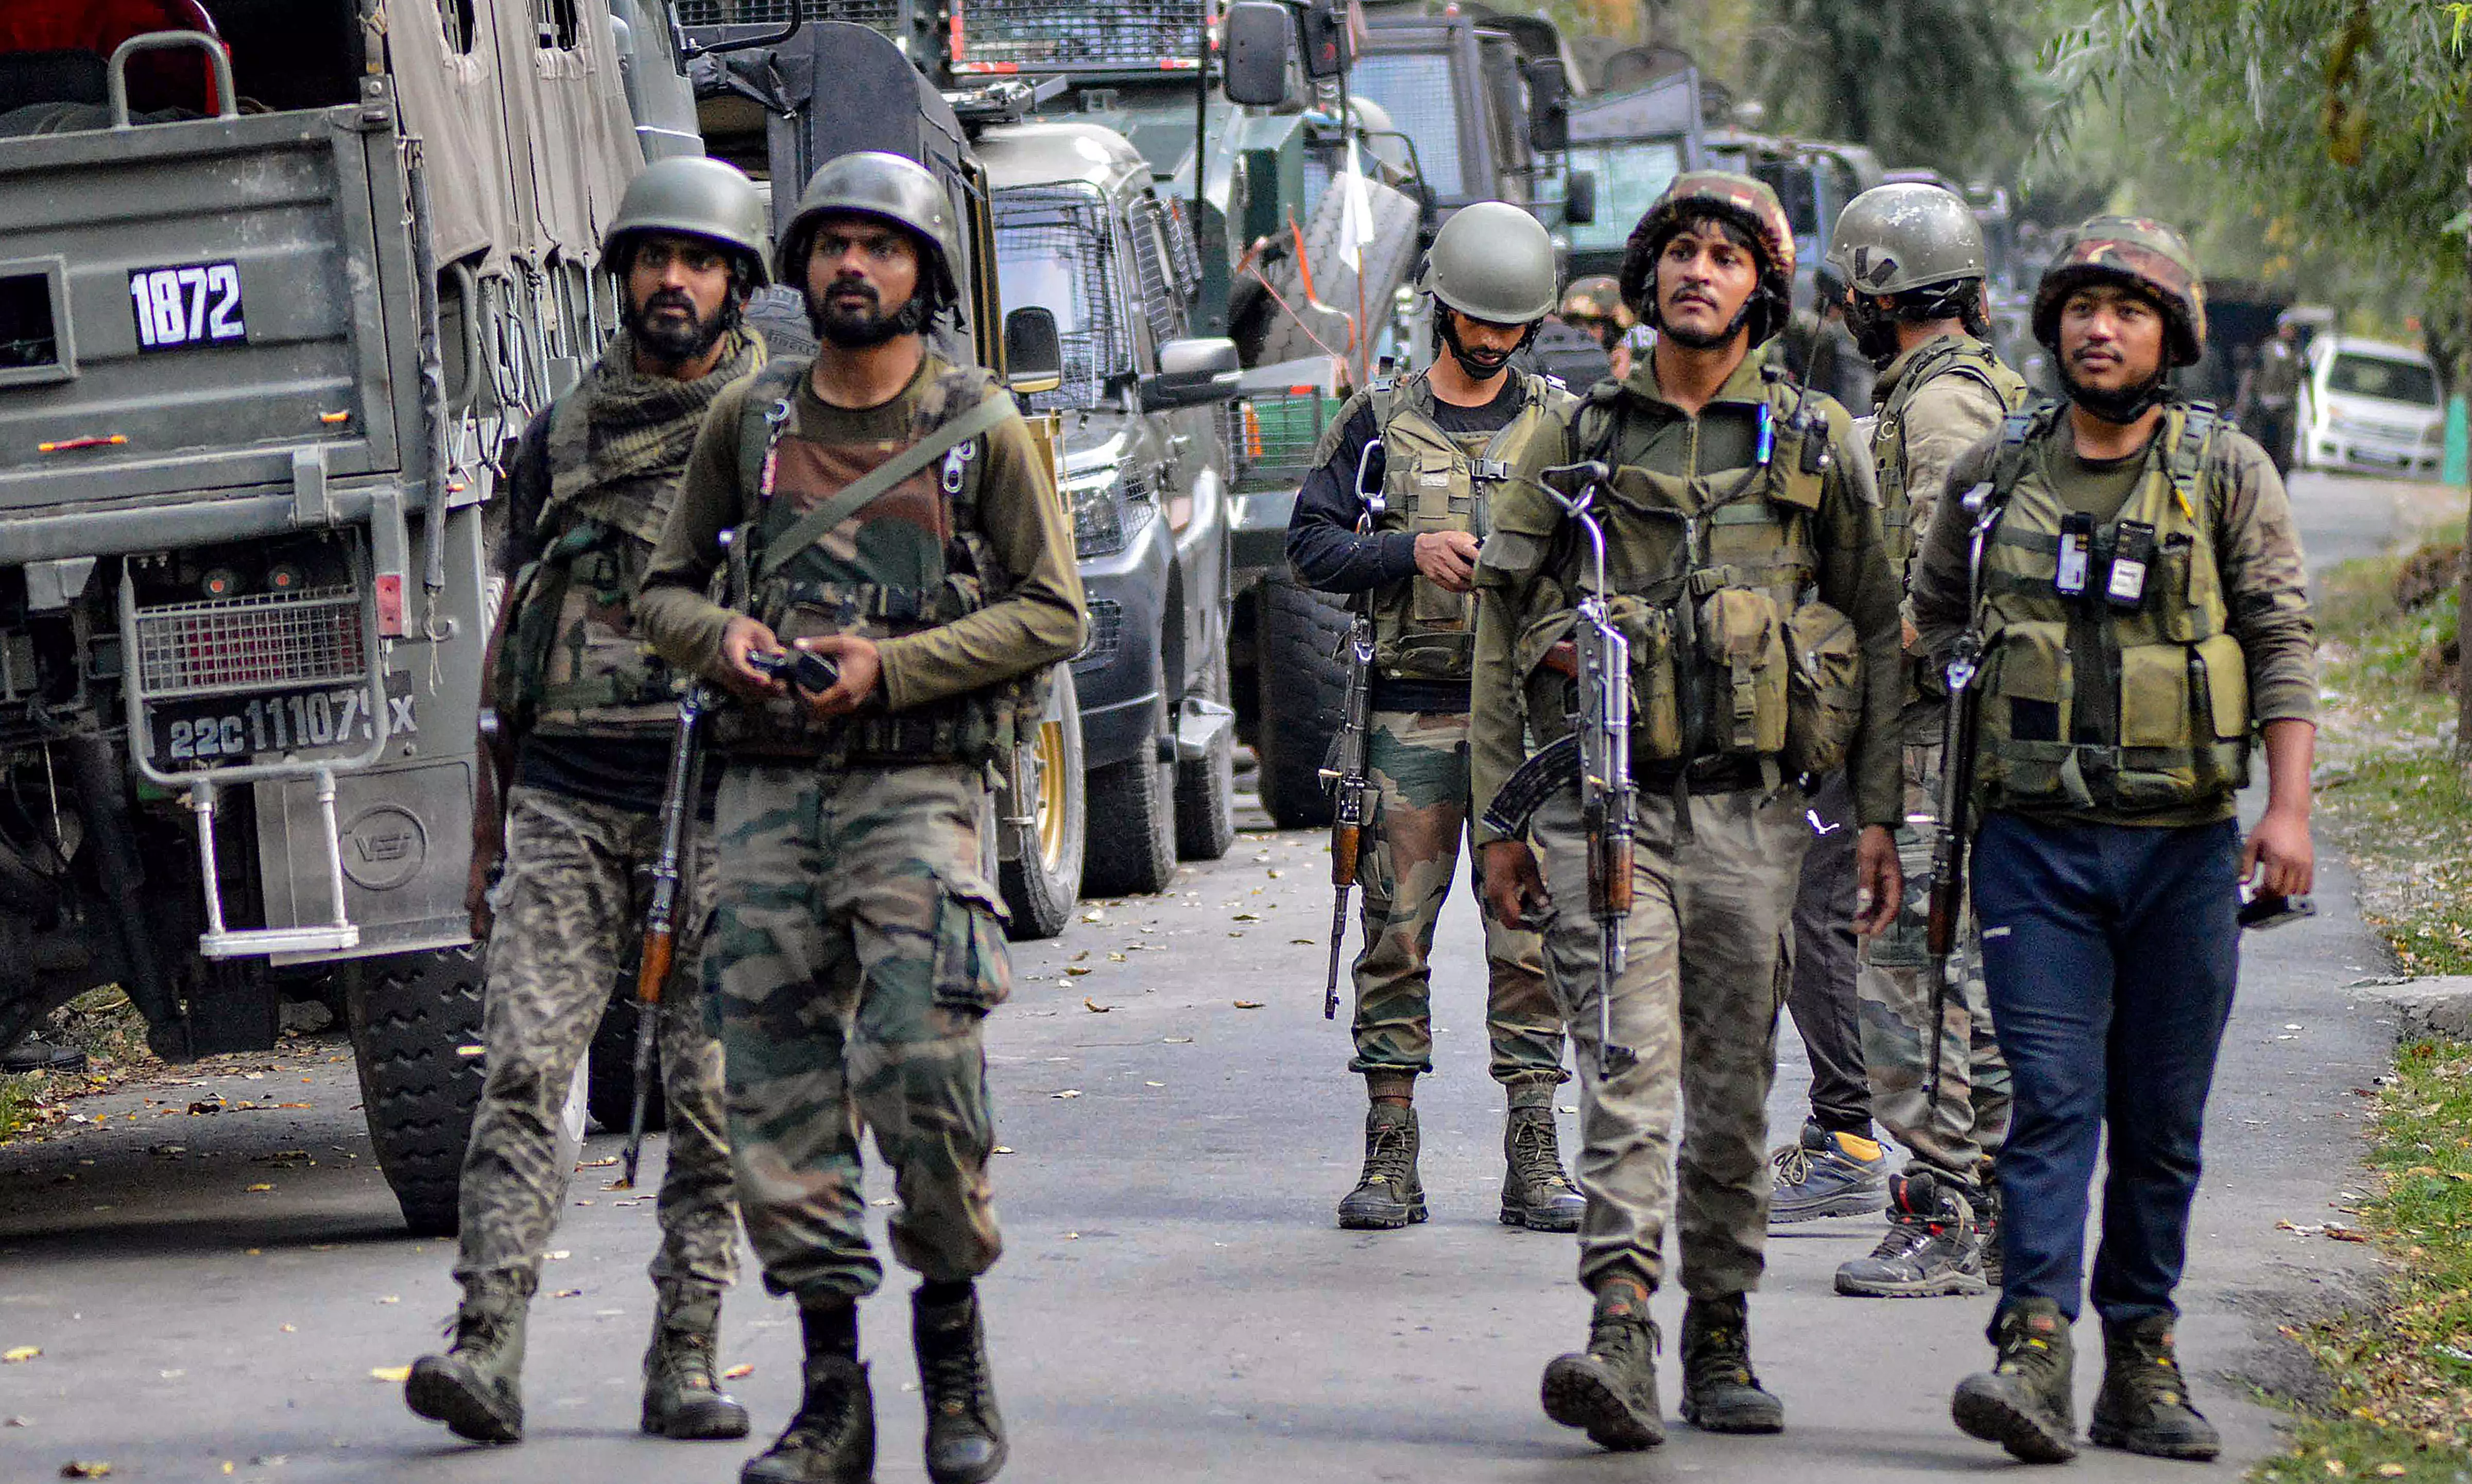 3 suspected JeM terrorists killed in gunfight with security forces in Doda, J&K